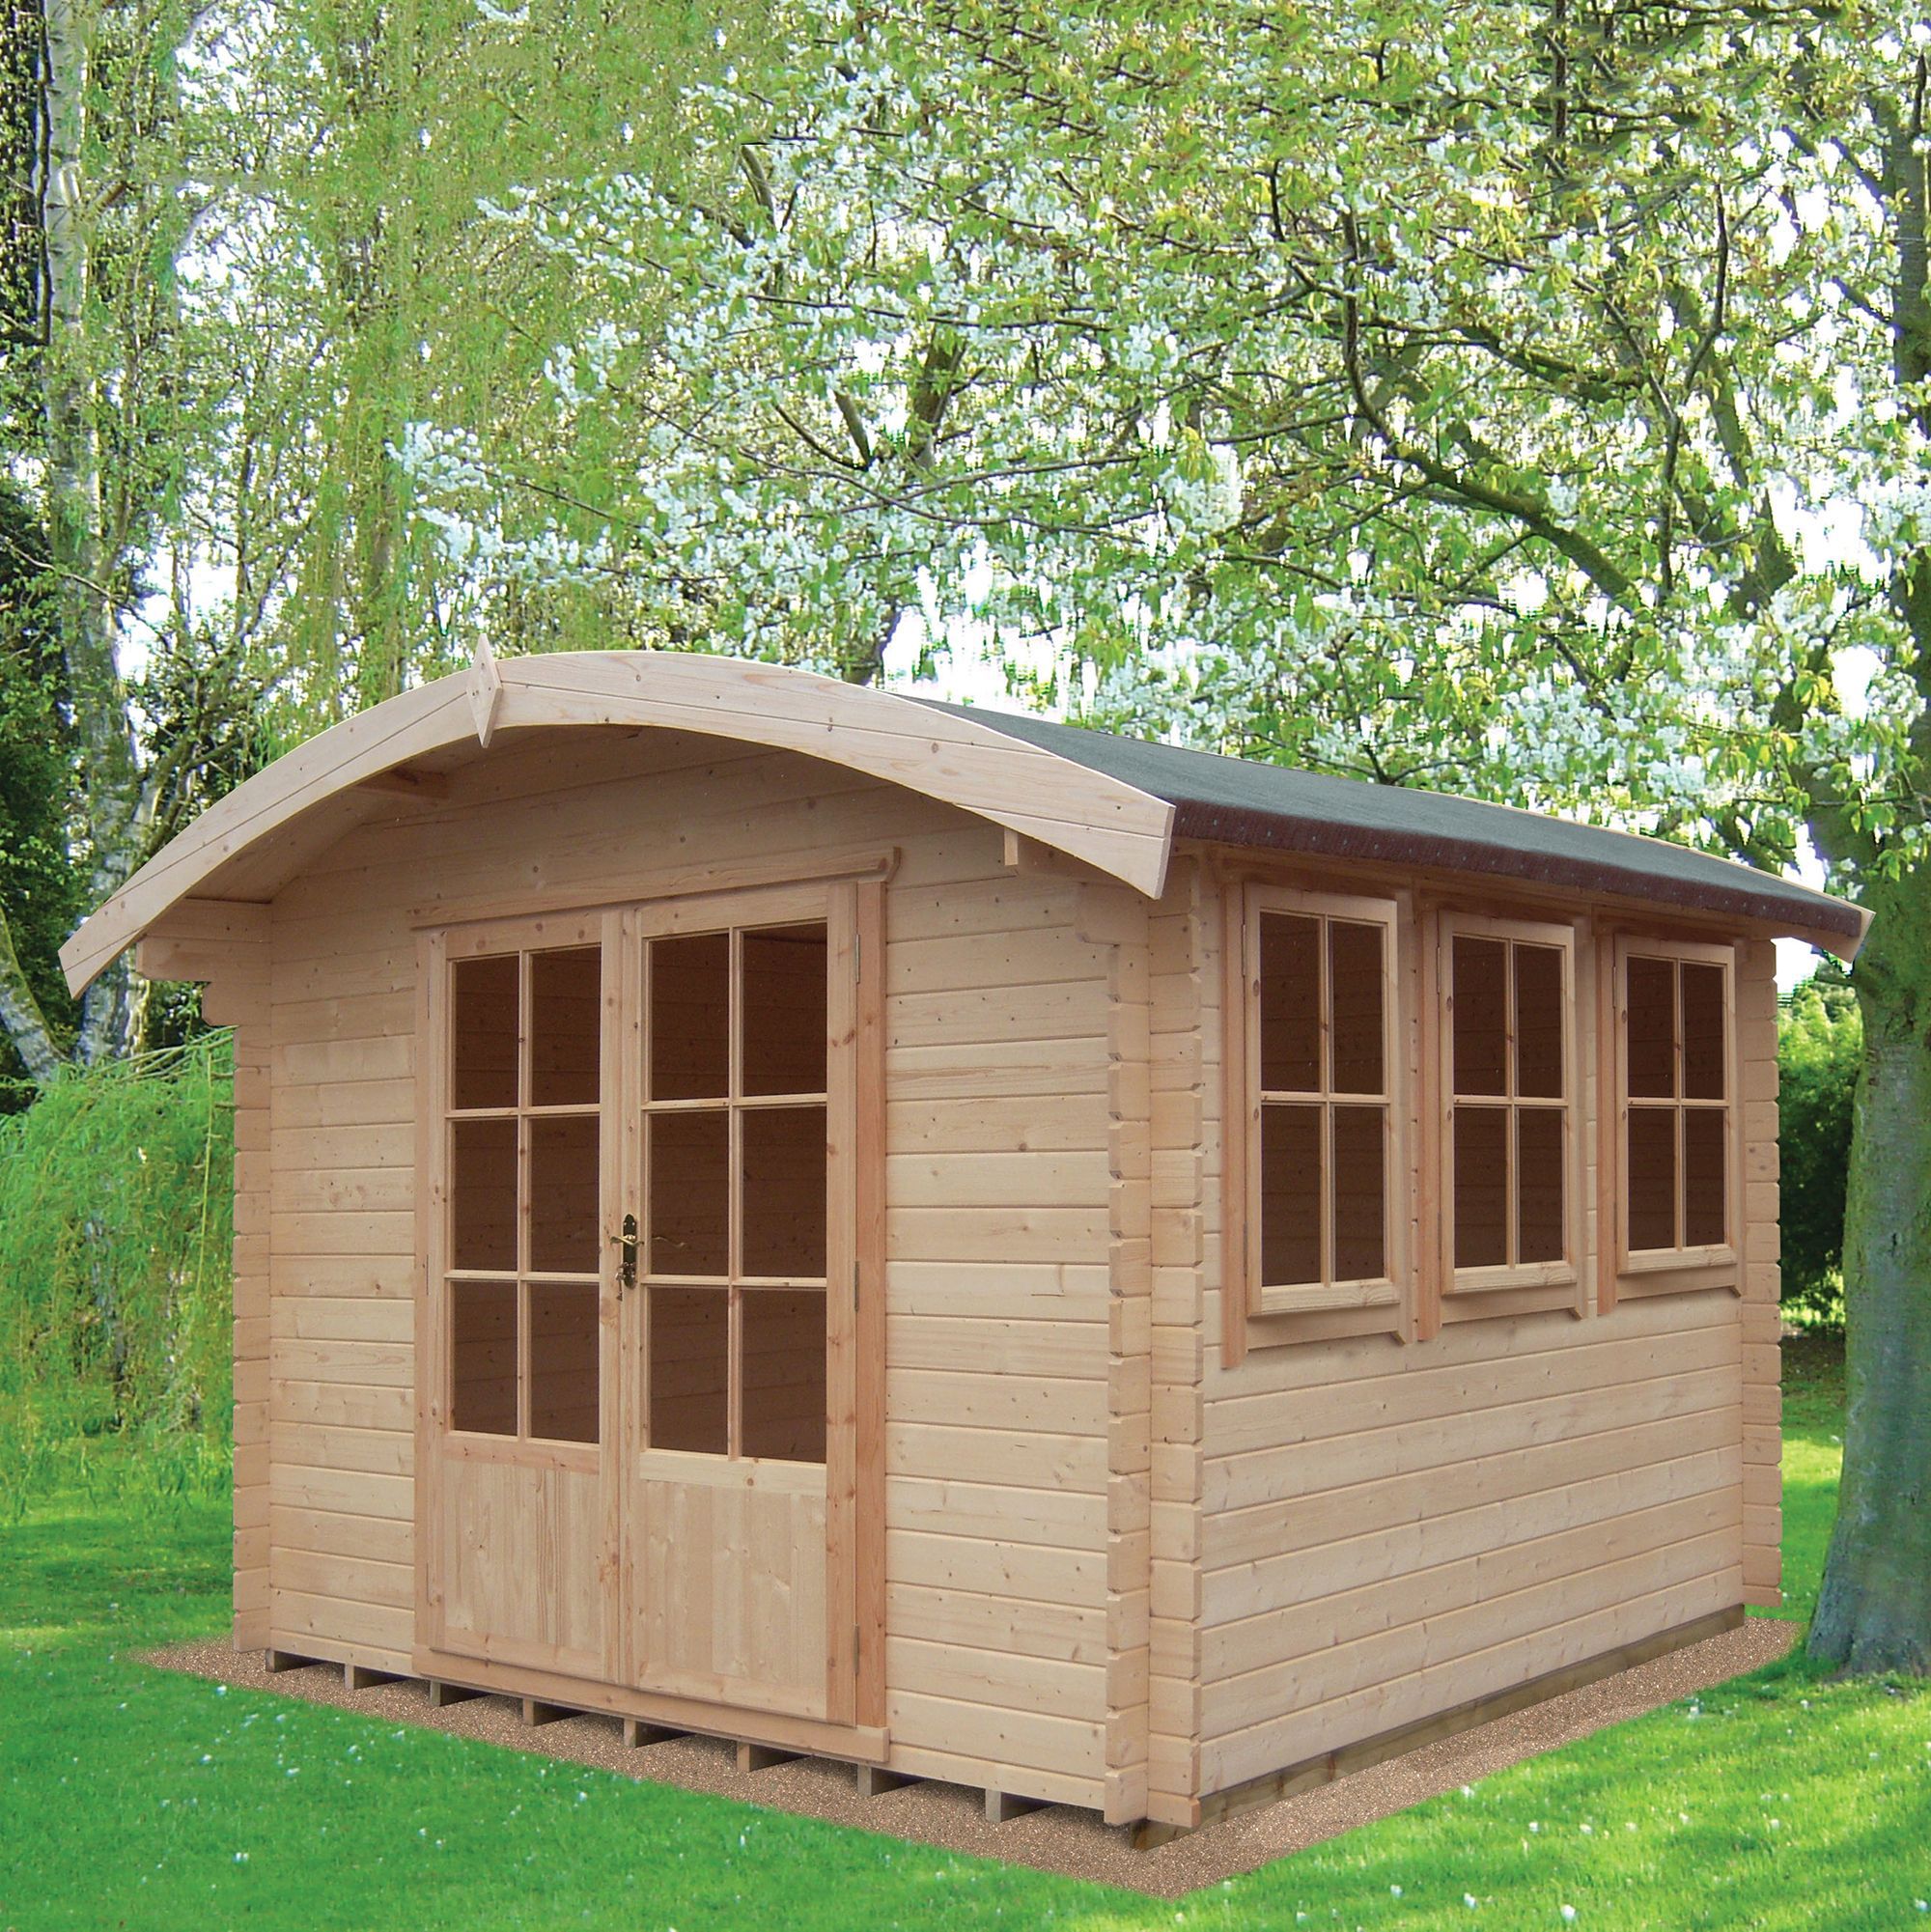 Shire Kilburn 12x12 ft Toughened glass & 3 windows Curved Wooden Cabin - Assembly service included